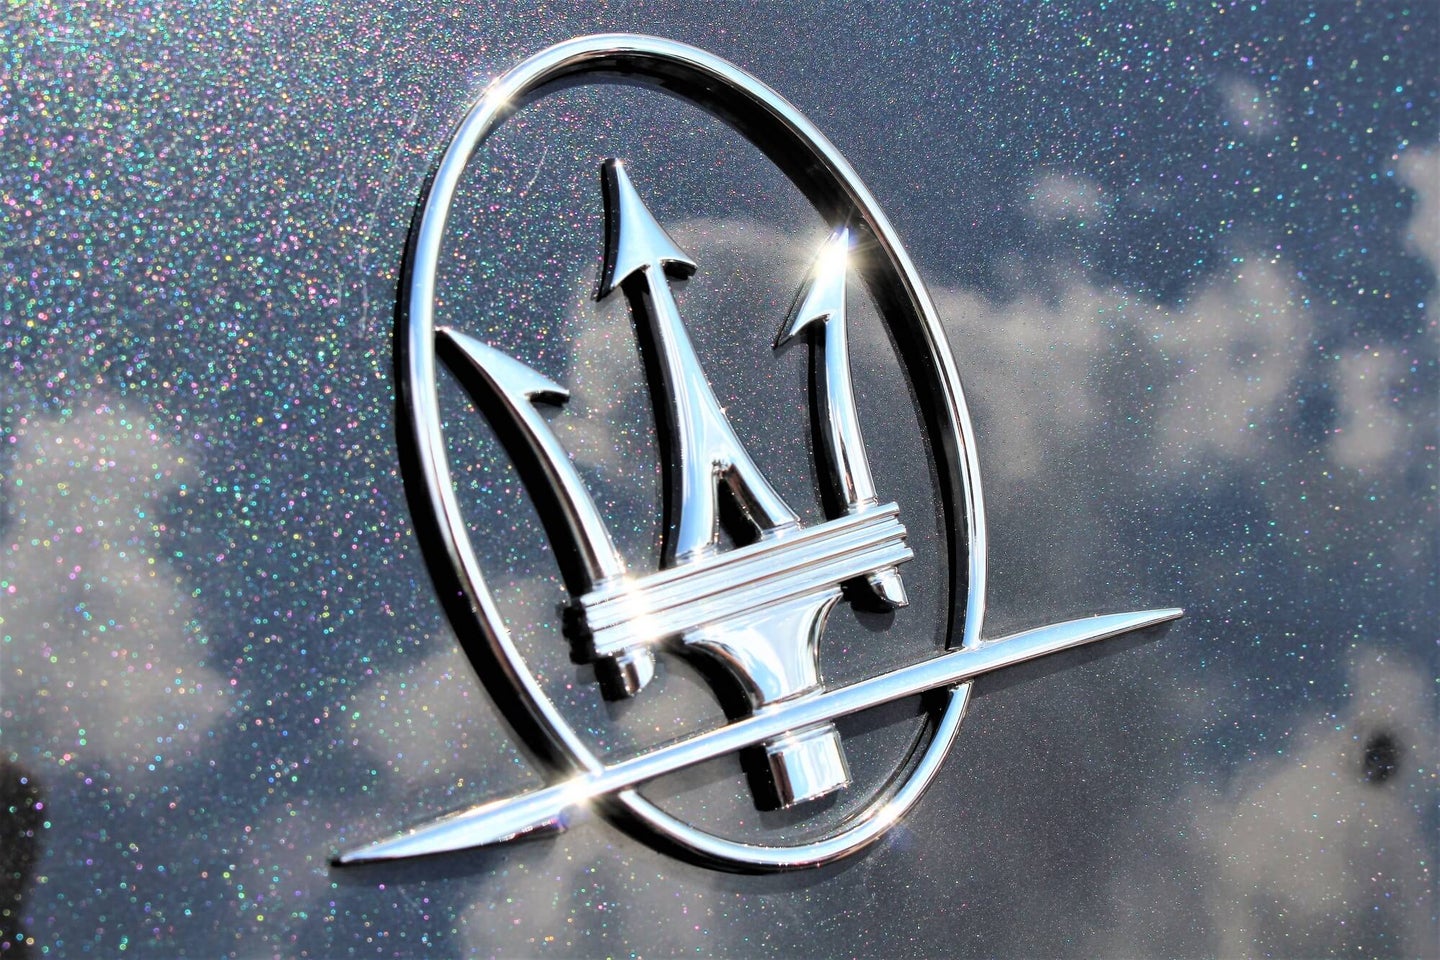 Maserati Extended Warranty: Limited Options for the Sports Car